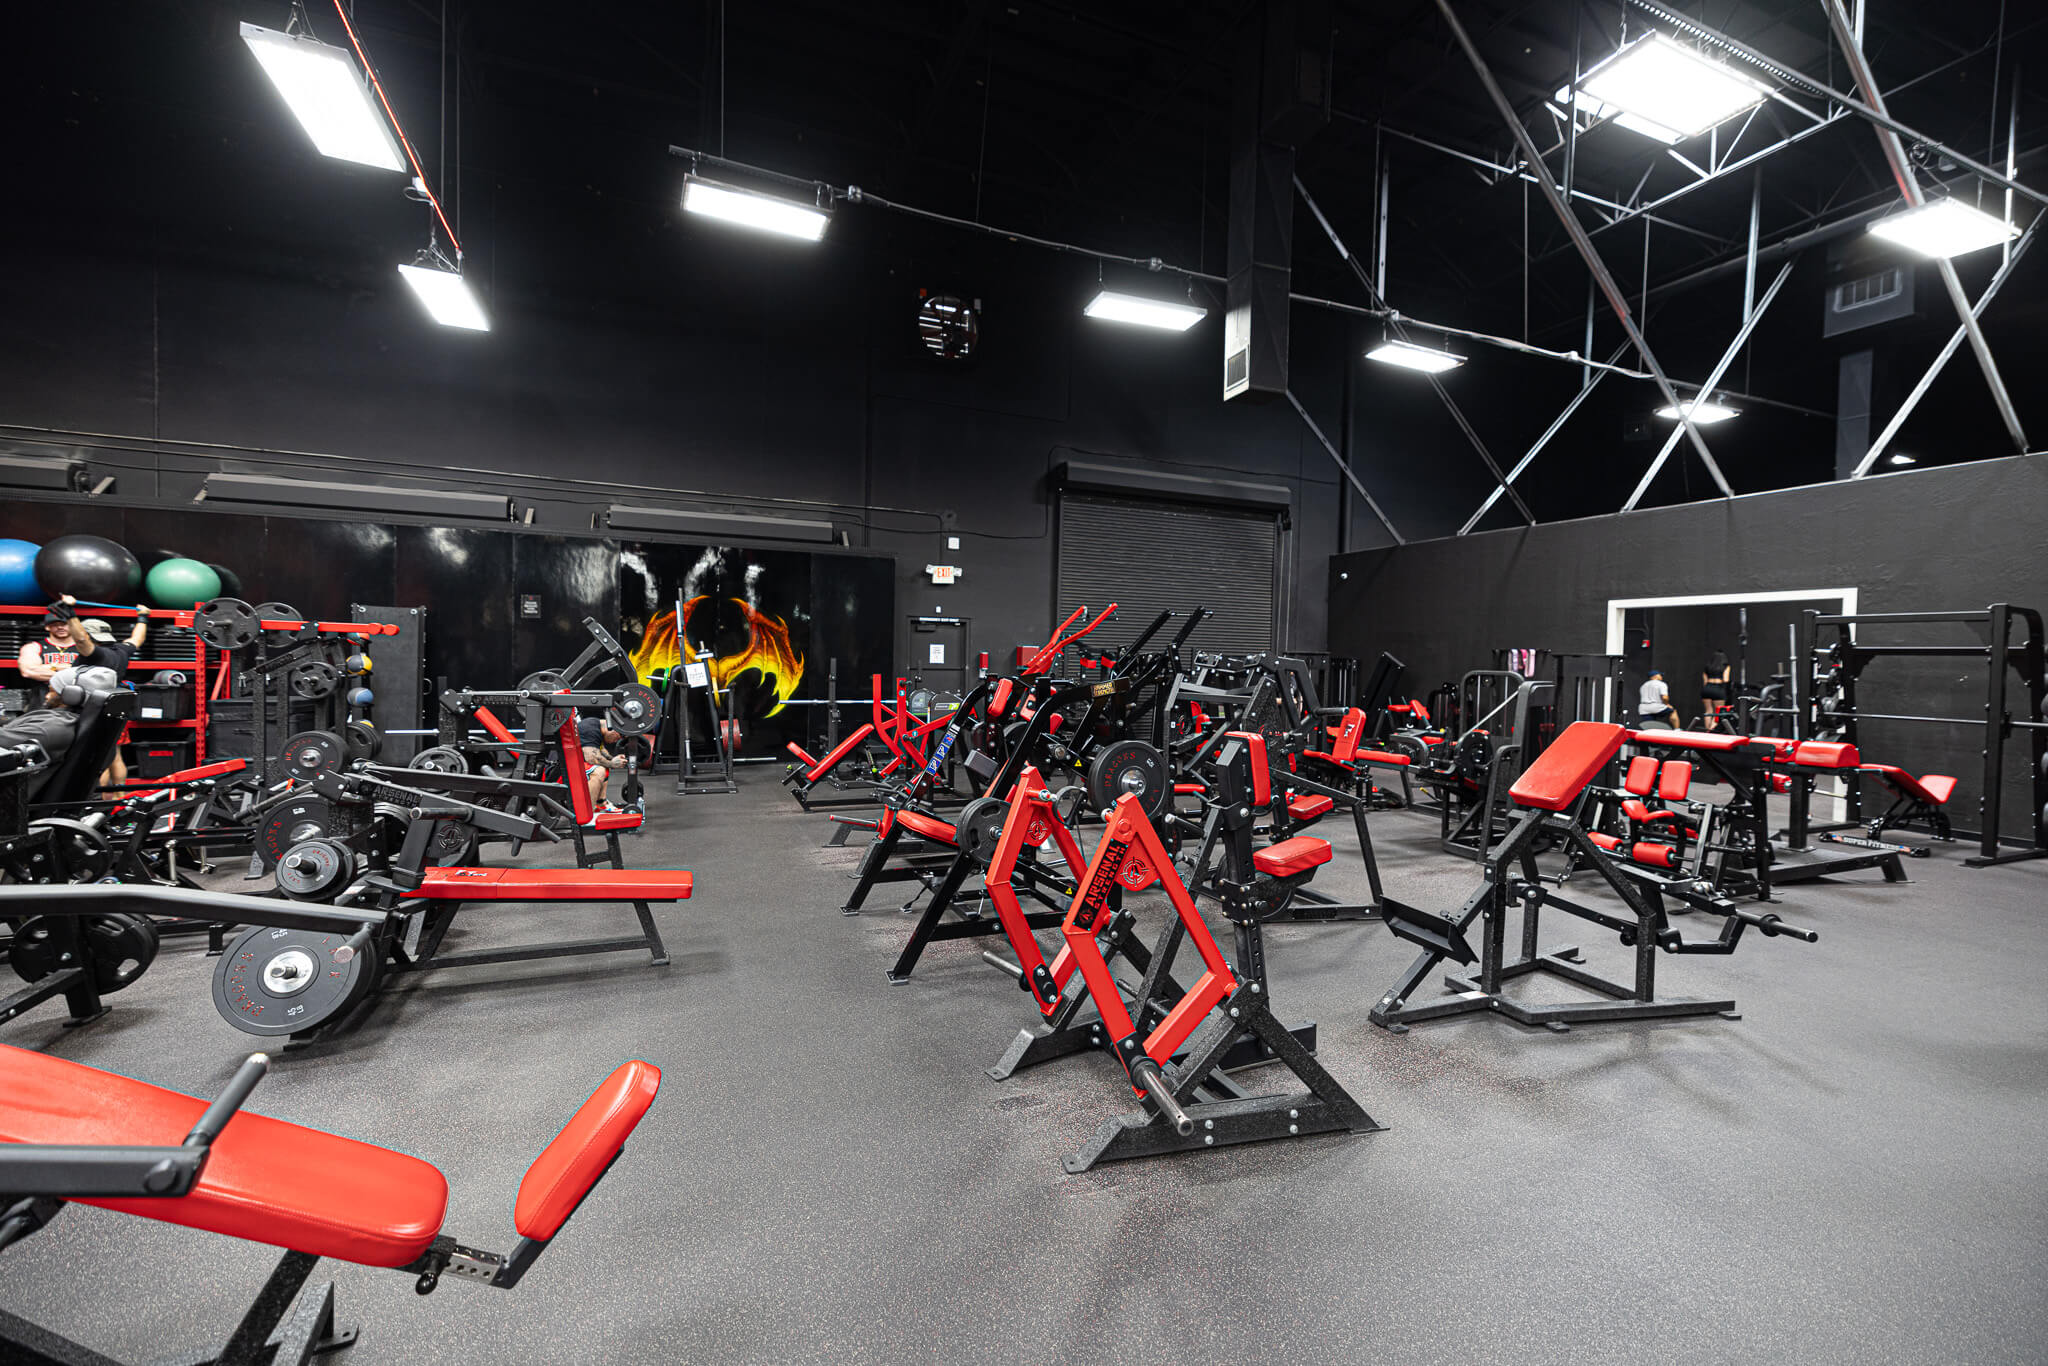 Come on in, We got new - Dragon's Lair Gym - Las Vegas